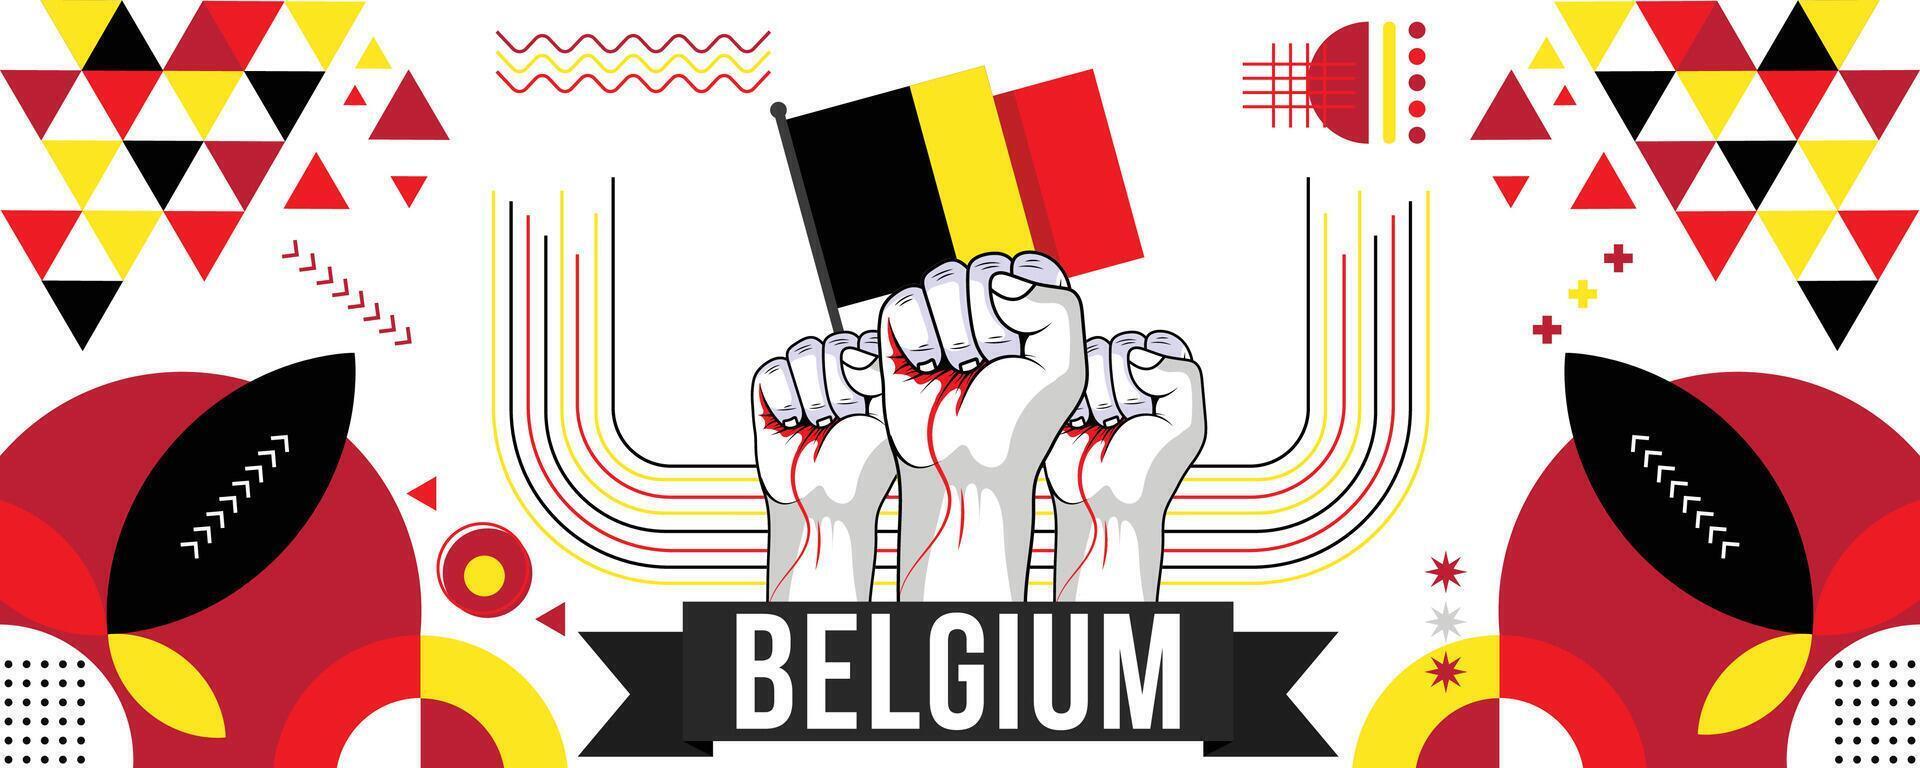 belgiumnational or independence day banner for country celebration. Flag of belgium with raised fists. Modern retro design with typorgaphy abstract geometric icons. Vector illustration.